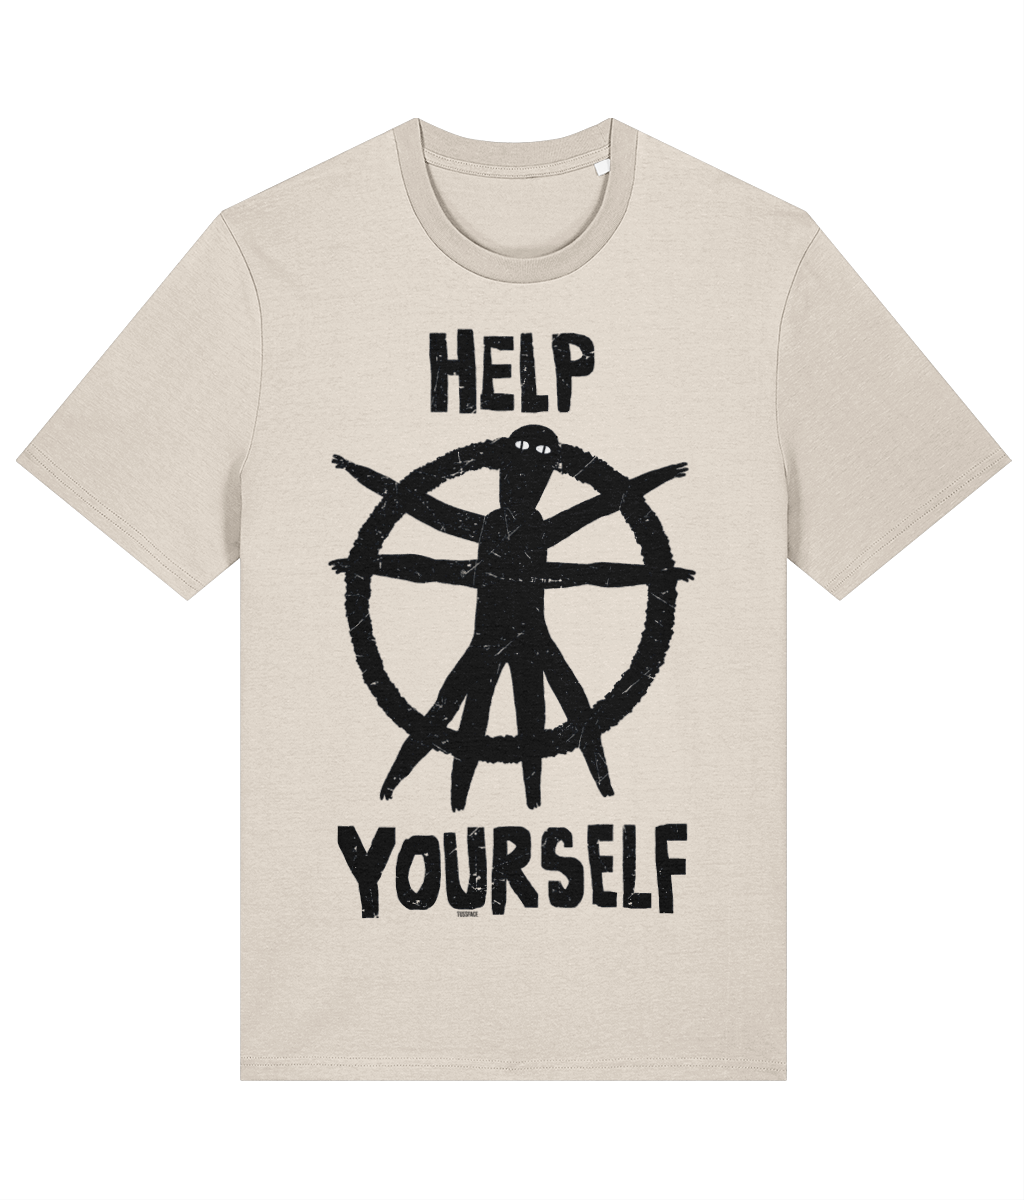 HELP YOURSELF - We Are Bl1p T-shirt by TussFace